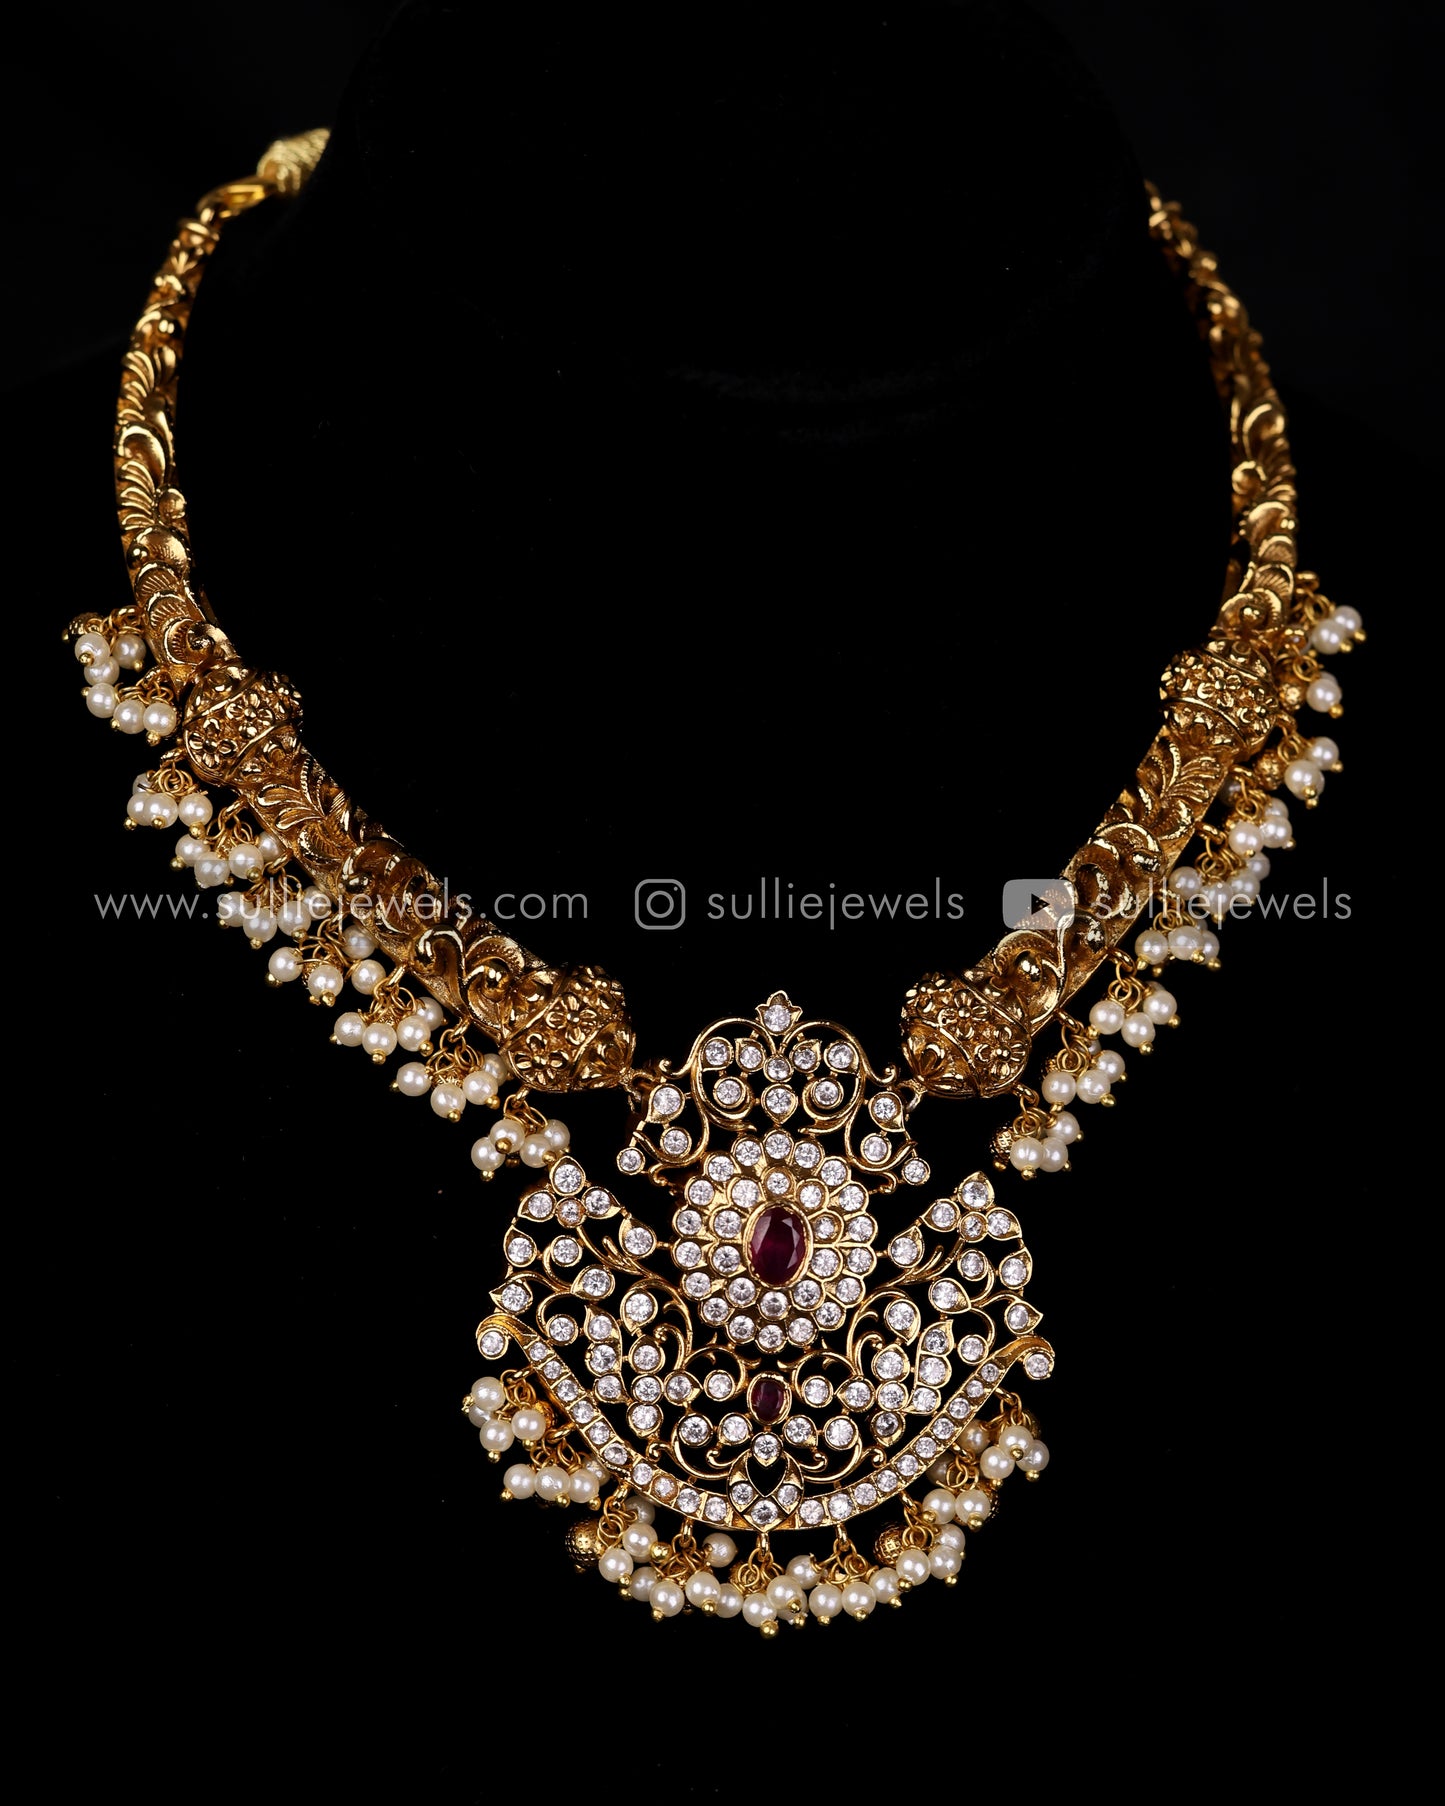 AD in Gold finish with Pearl drops Necklace Set